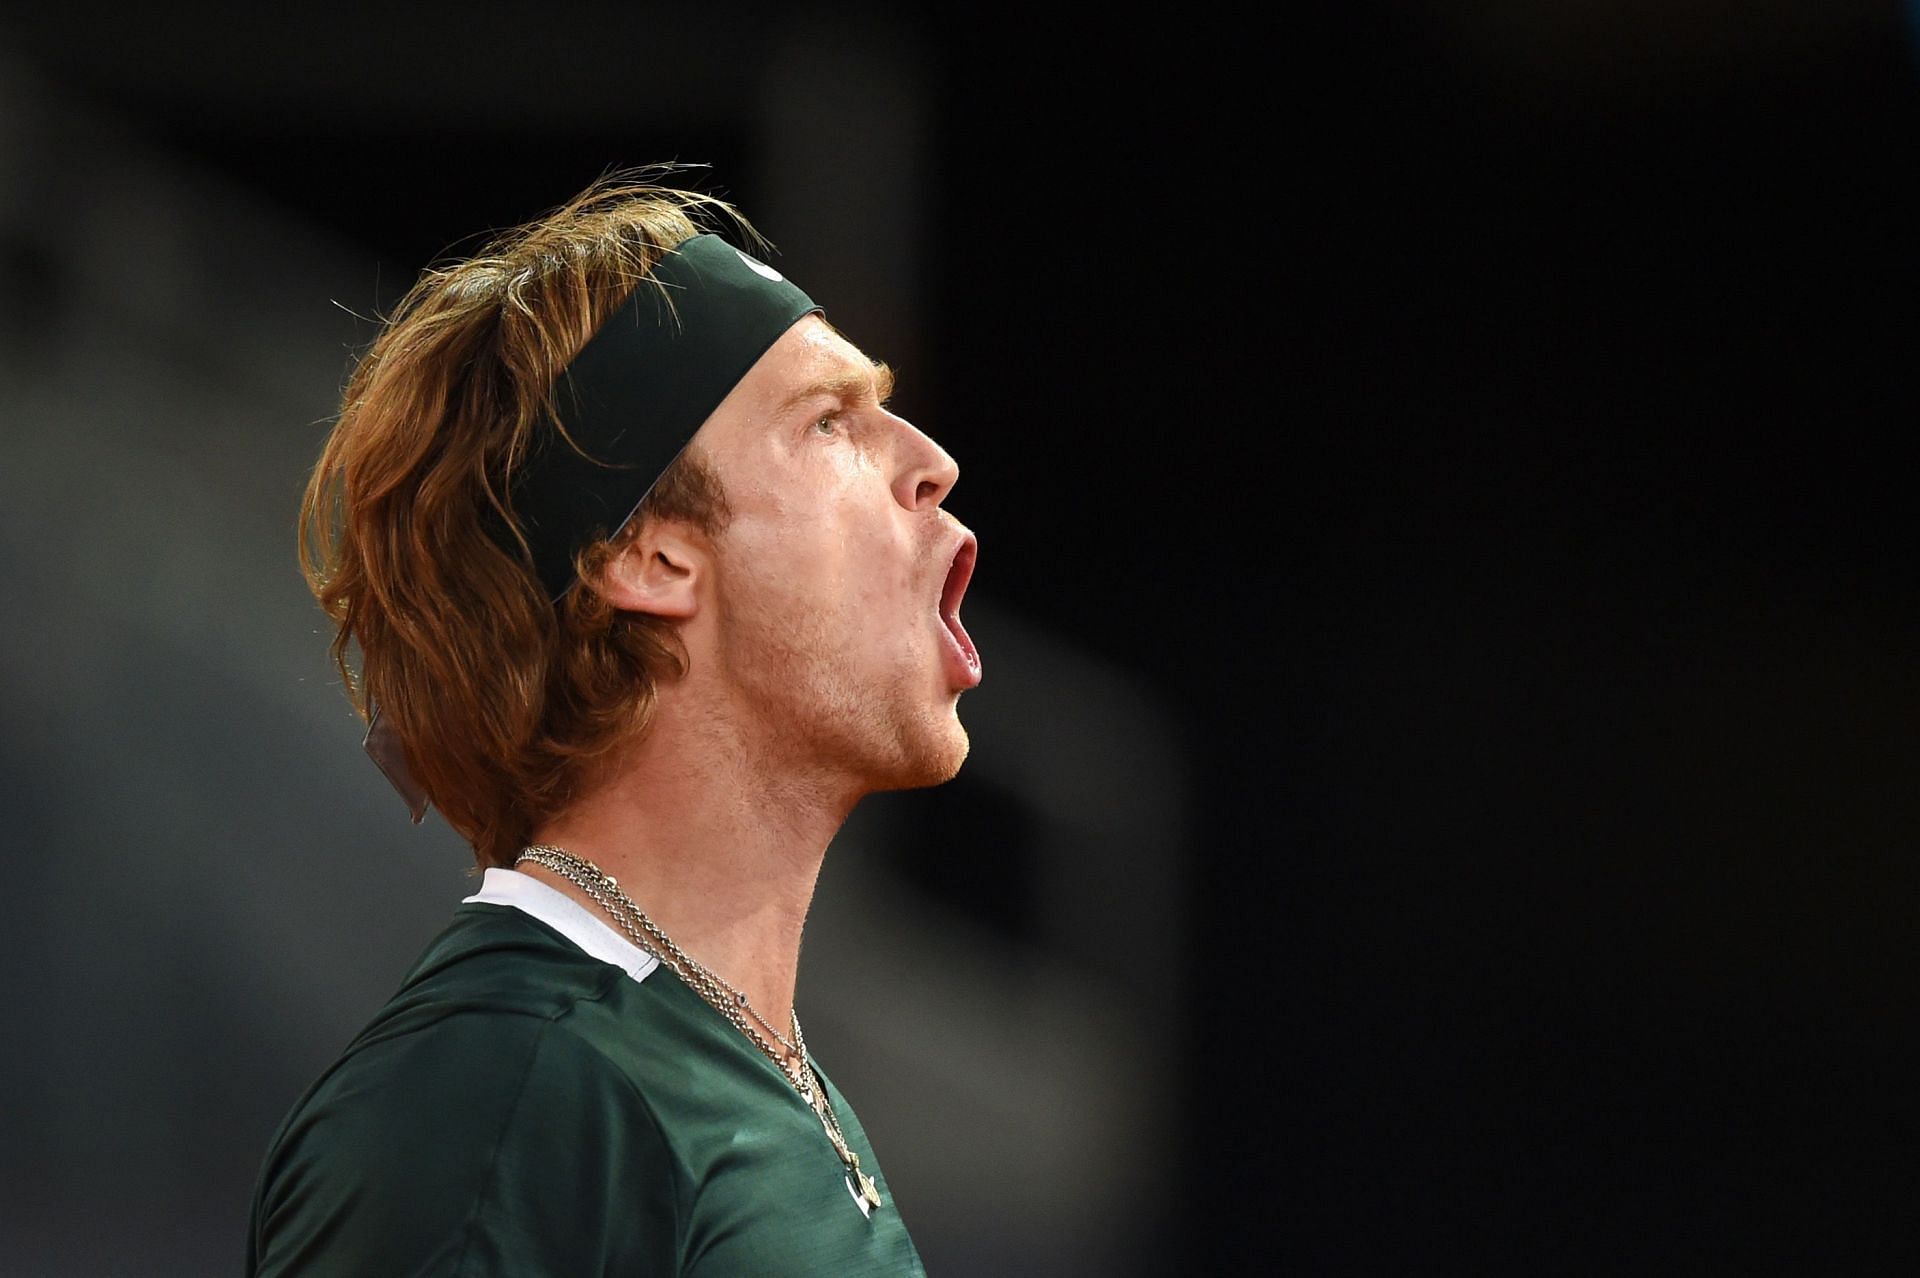 Andrey Rublev at the Mutua Madrid Open